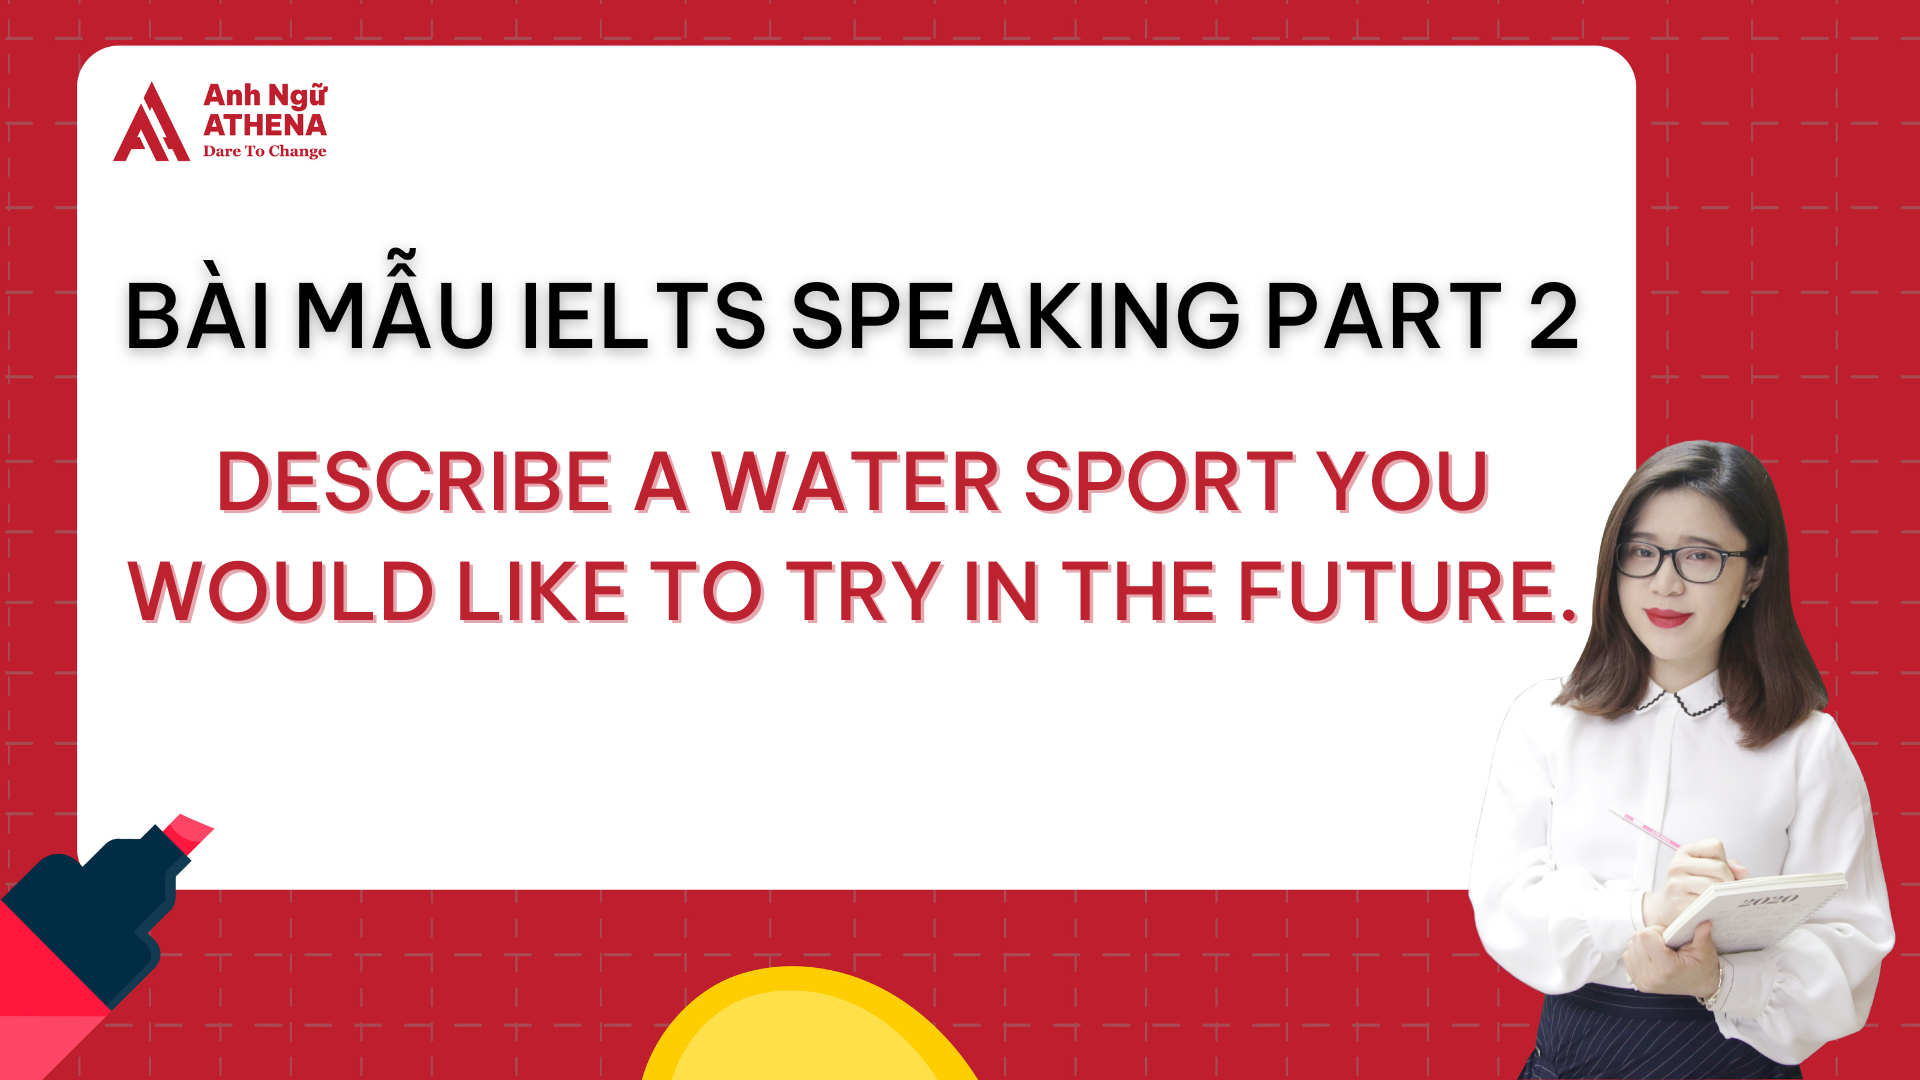 Bài mẫu IELTS Speaking Part 2 - Topic: Describe a water sport you would like to try in the future